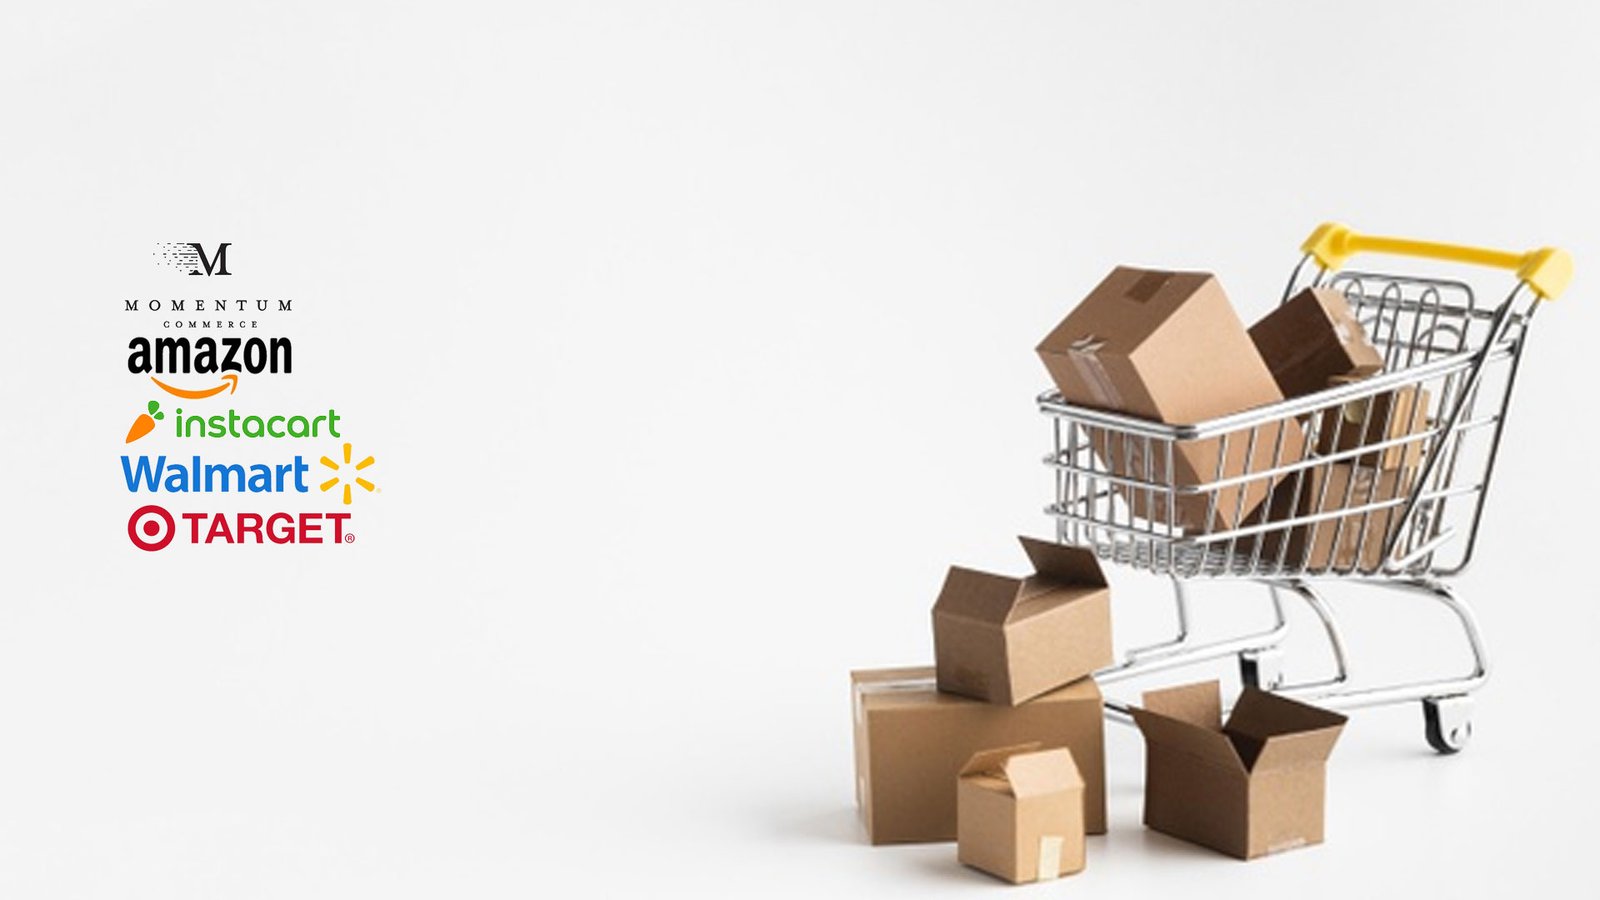 Momentum Commerce Launches to Support Brand Growth on Amazon, Instacart, Walmart & Target